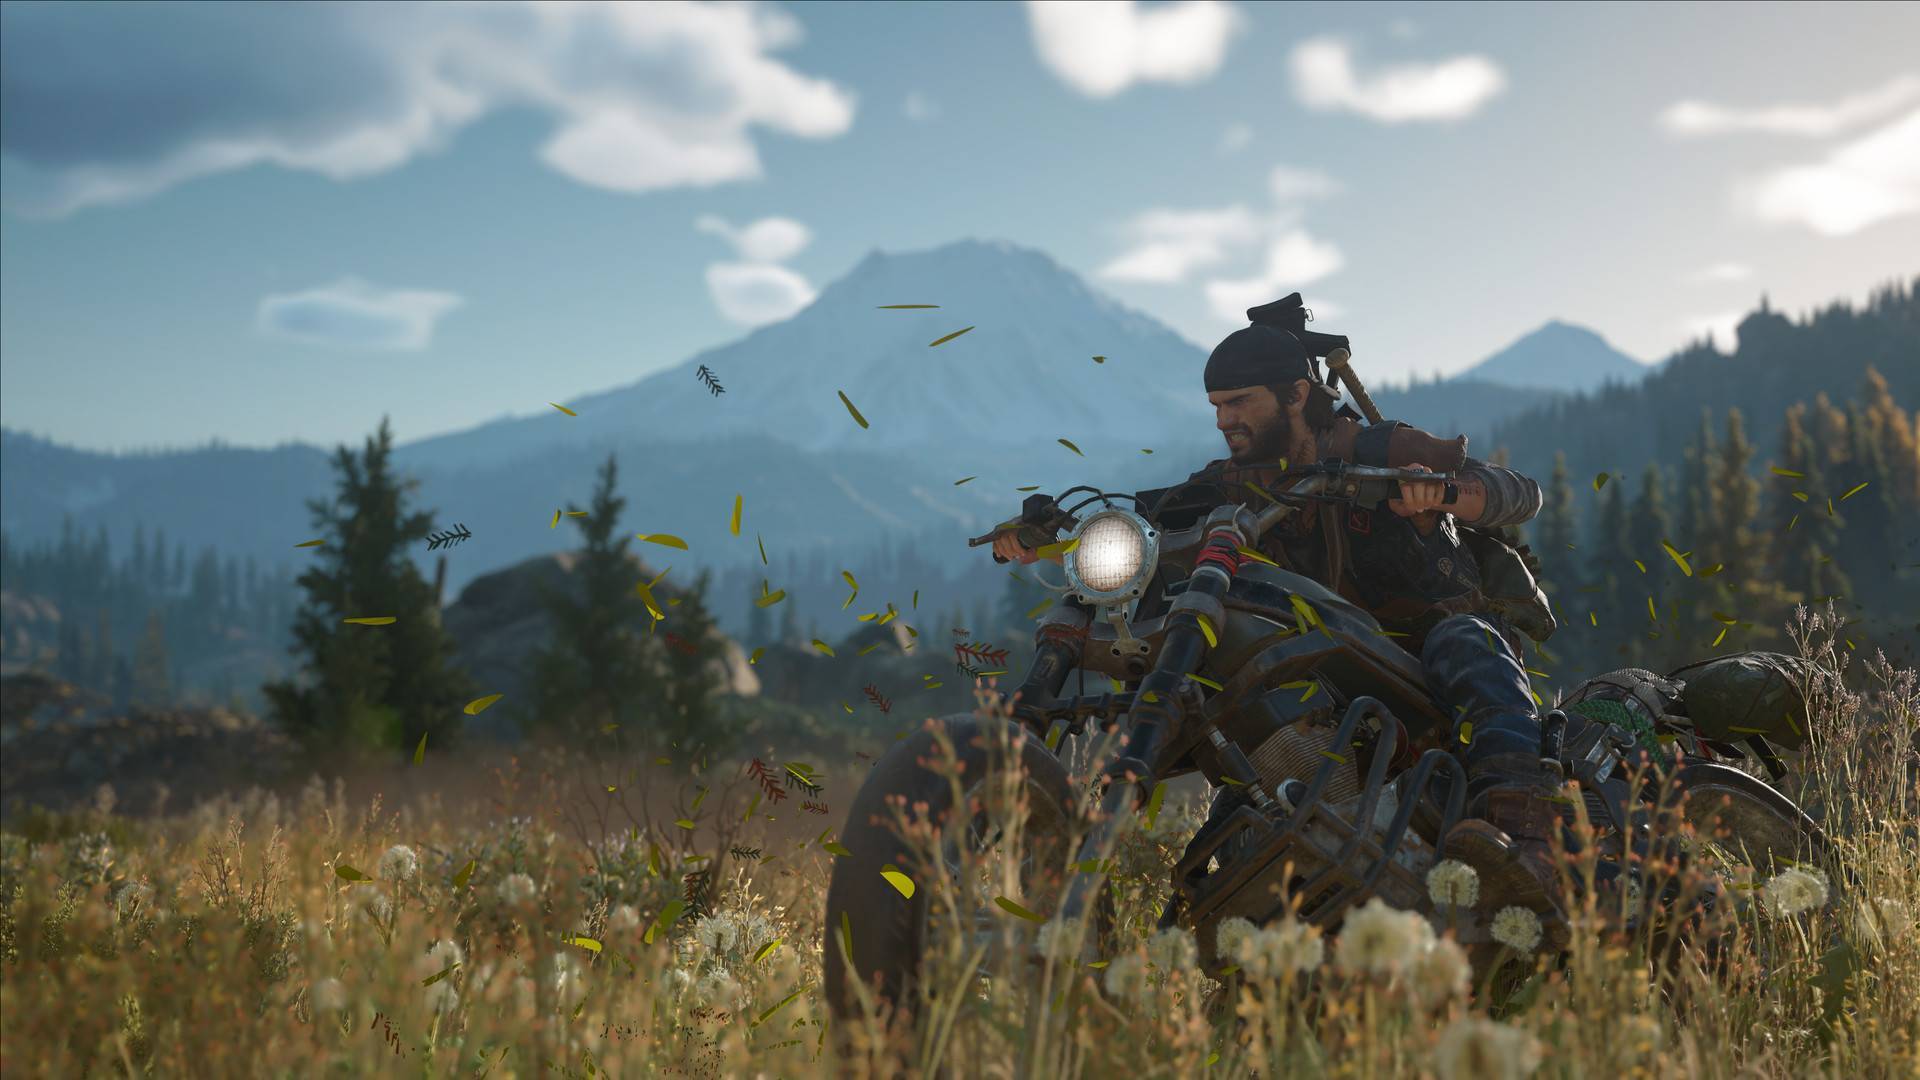 Game for PC days gone (2021) - AliExpress